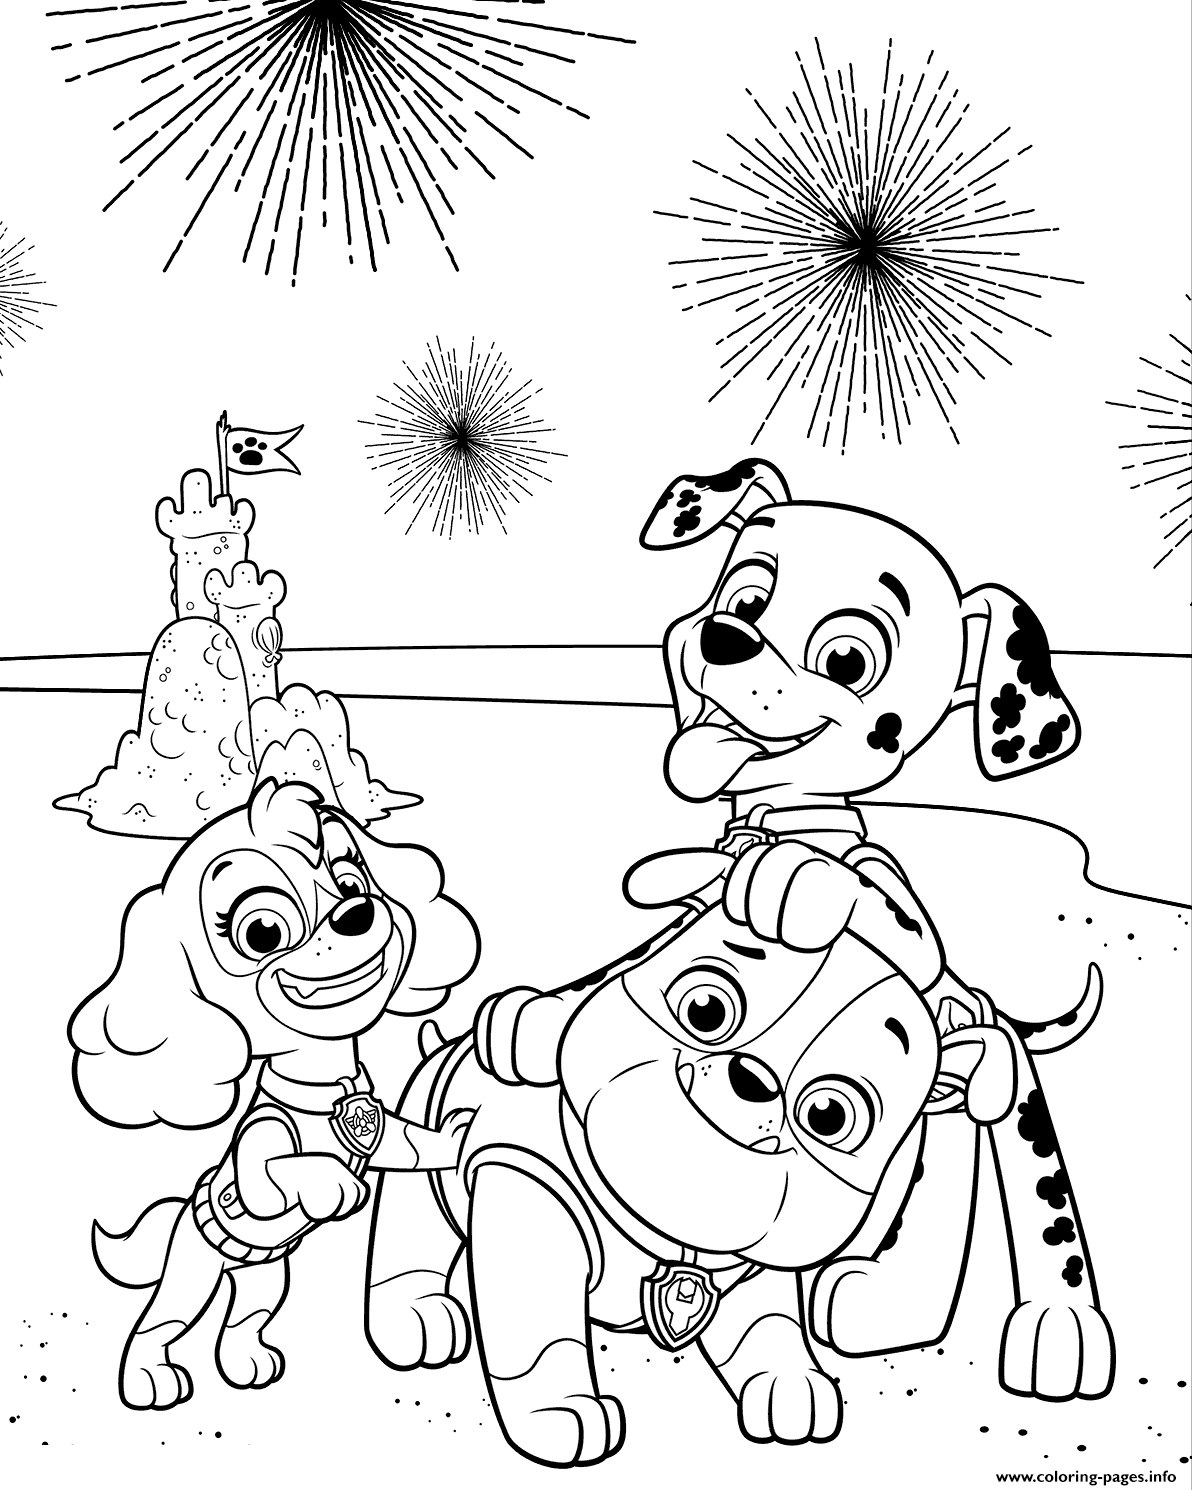 PAW Patrol 4th Of July coloring